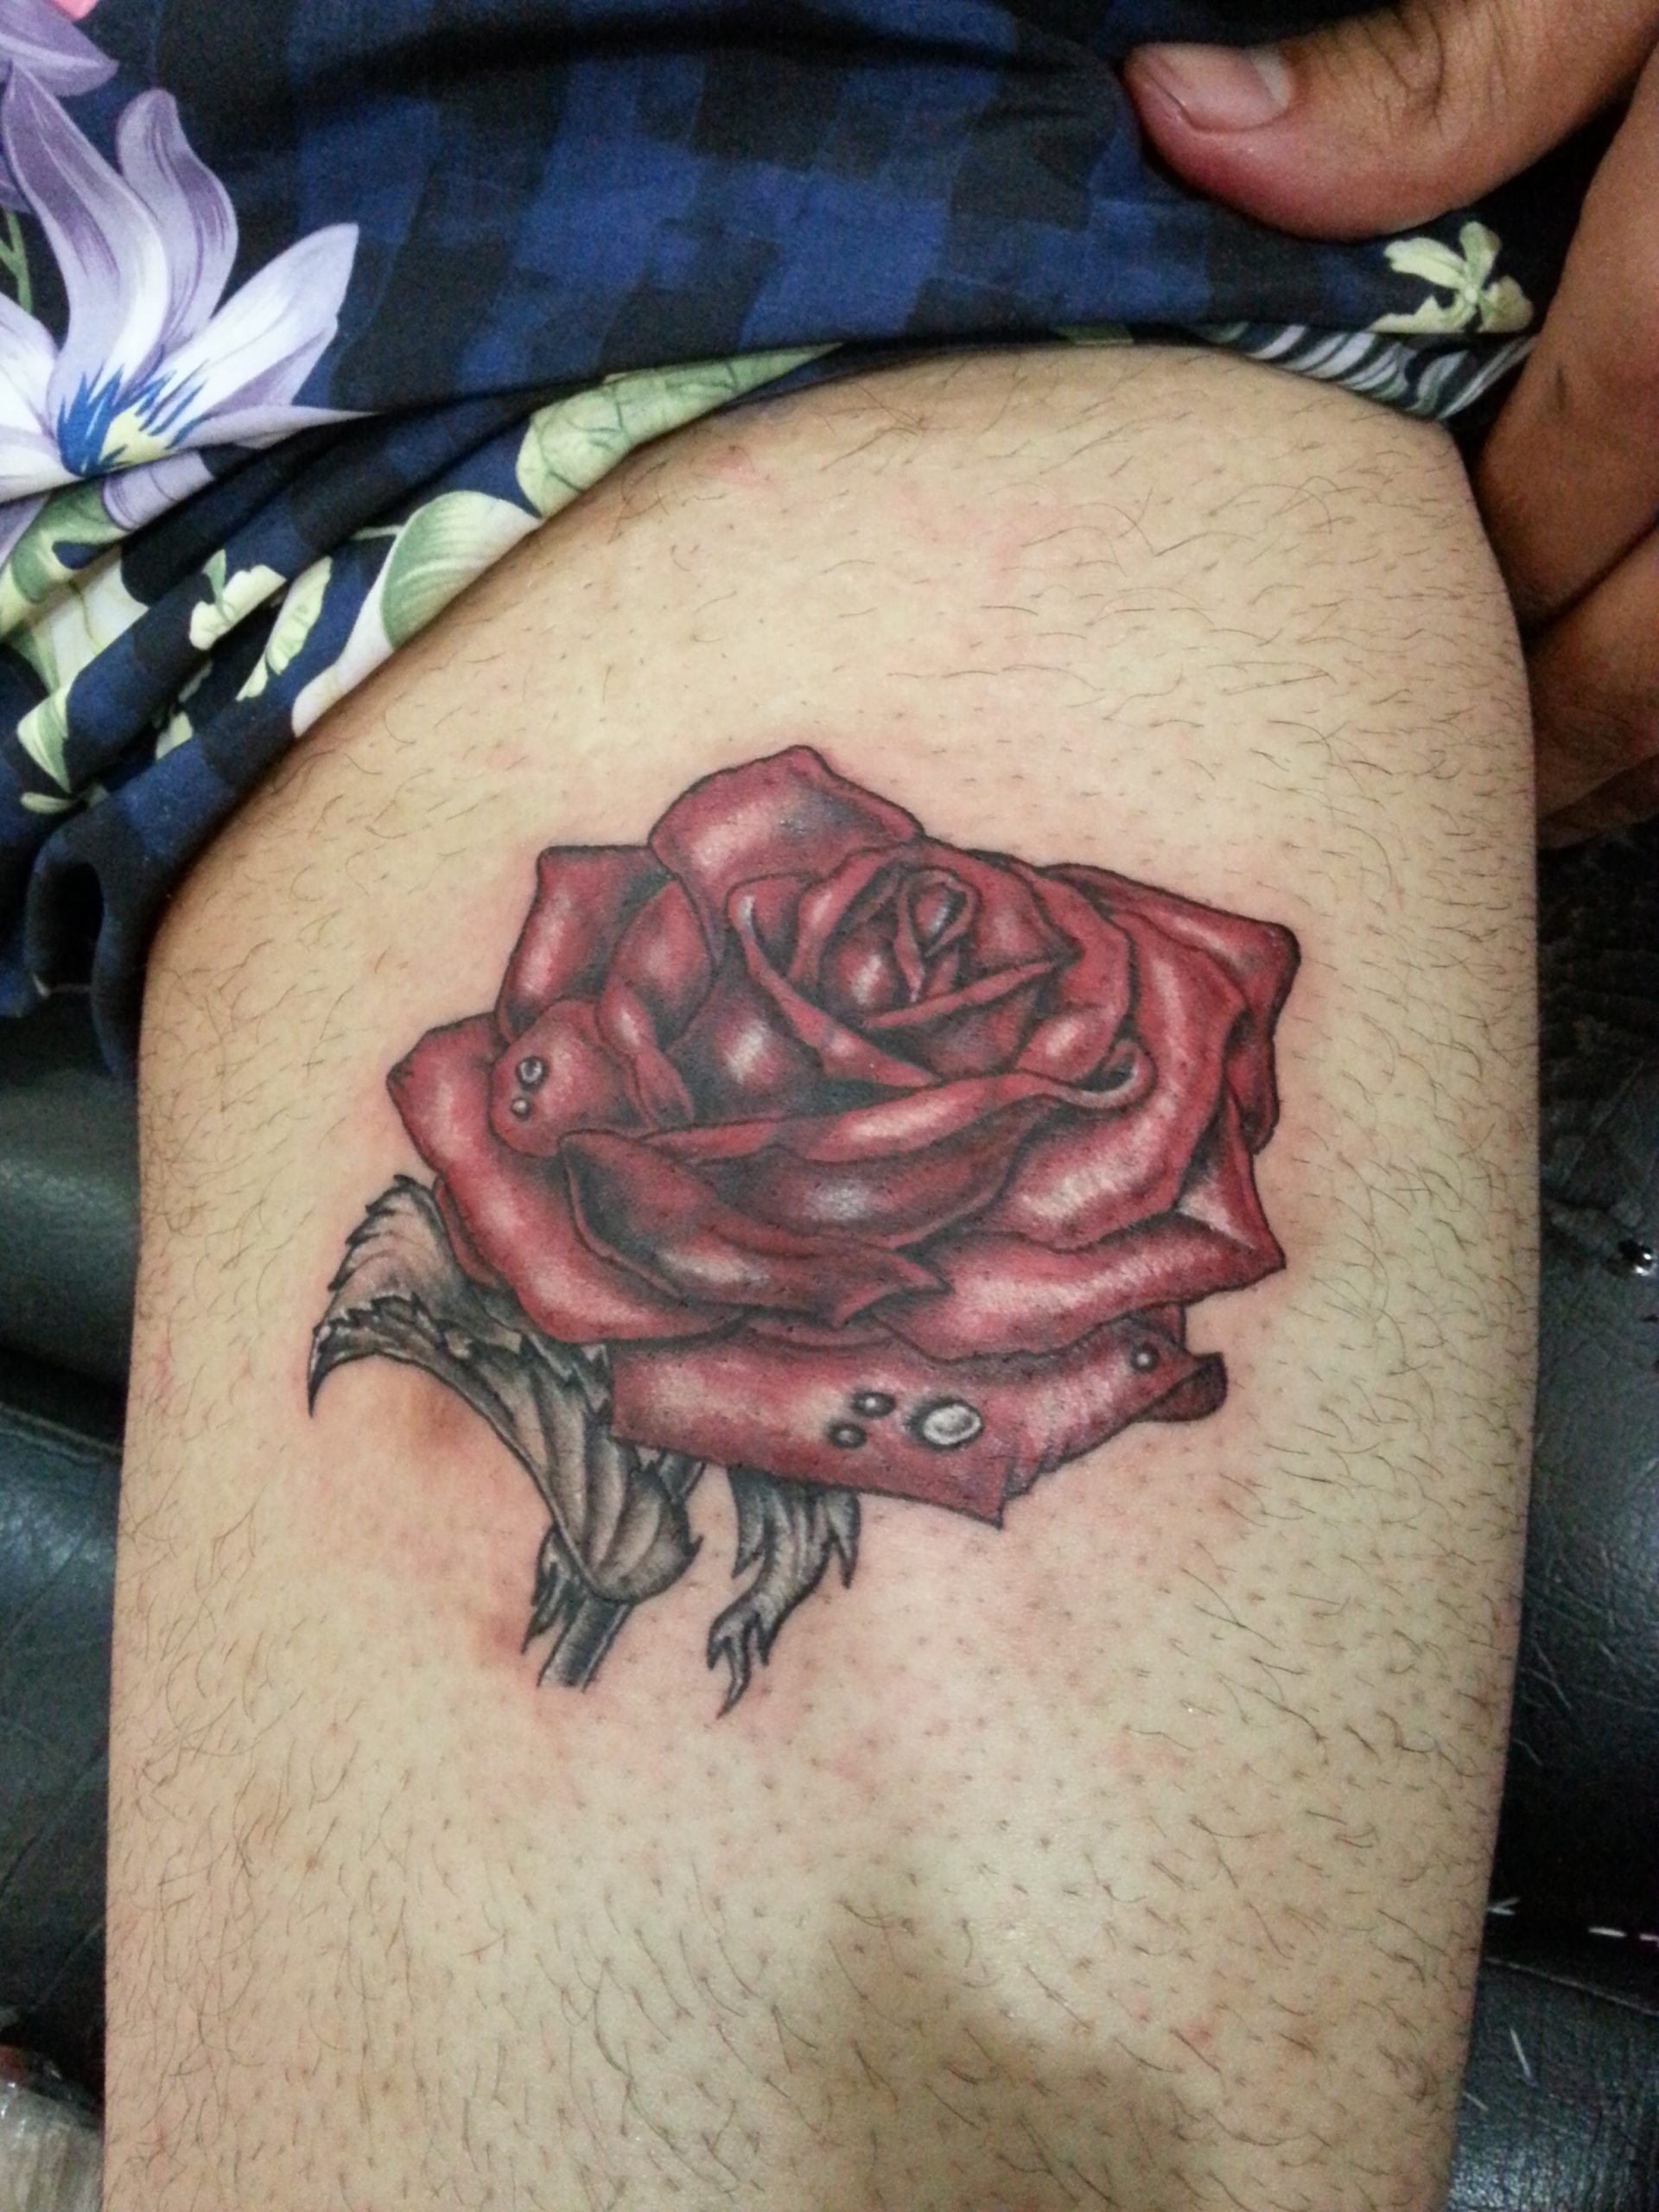 You are currently viewing Tattoo Artist Goa, Best Tattoo Artist Goa, Tattoo Studio Goa, Goa Tattoo